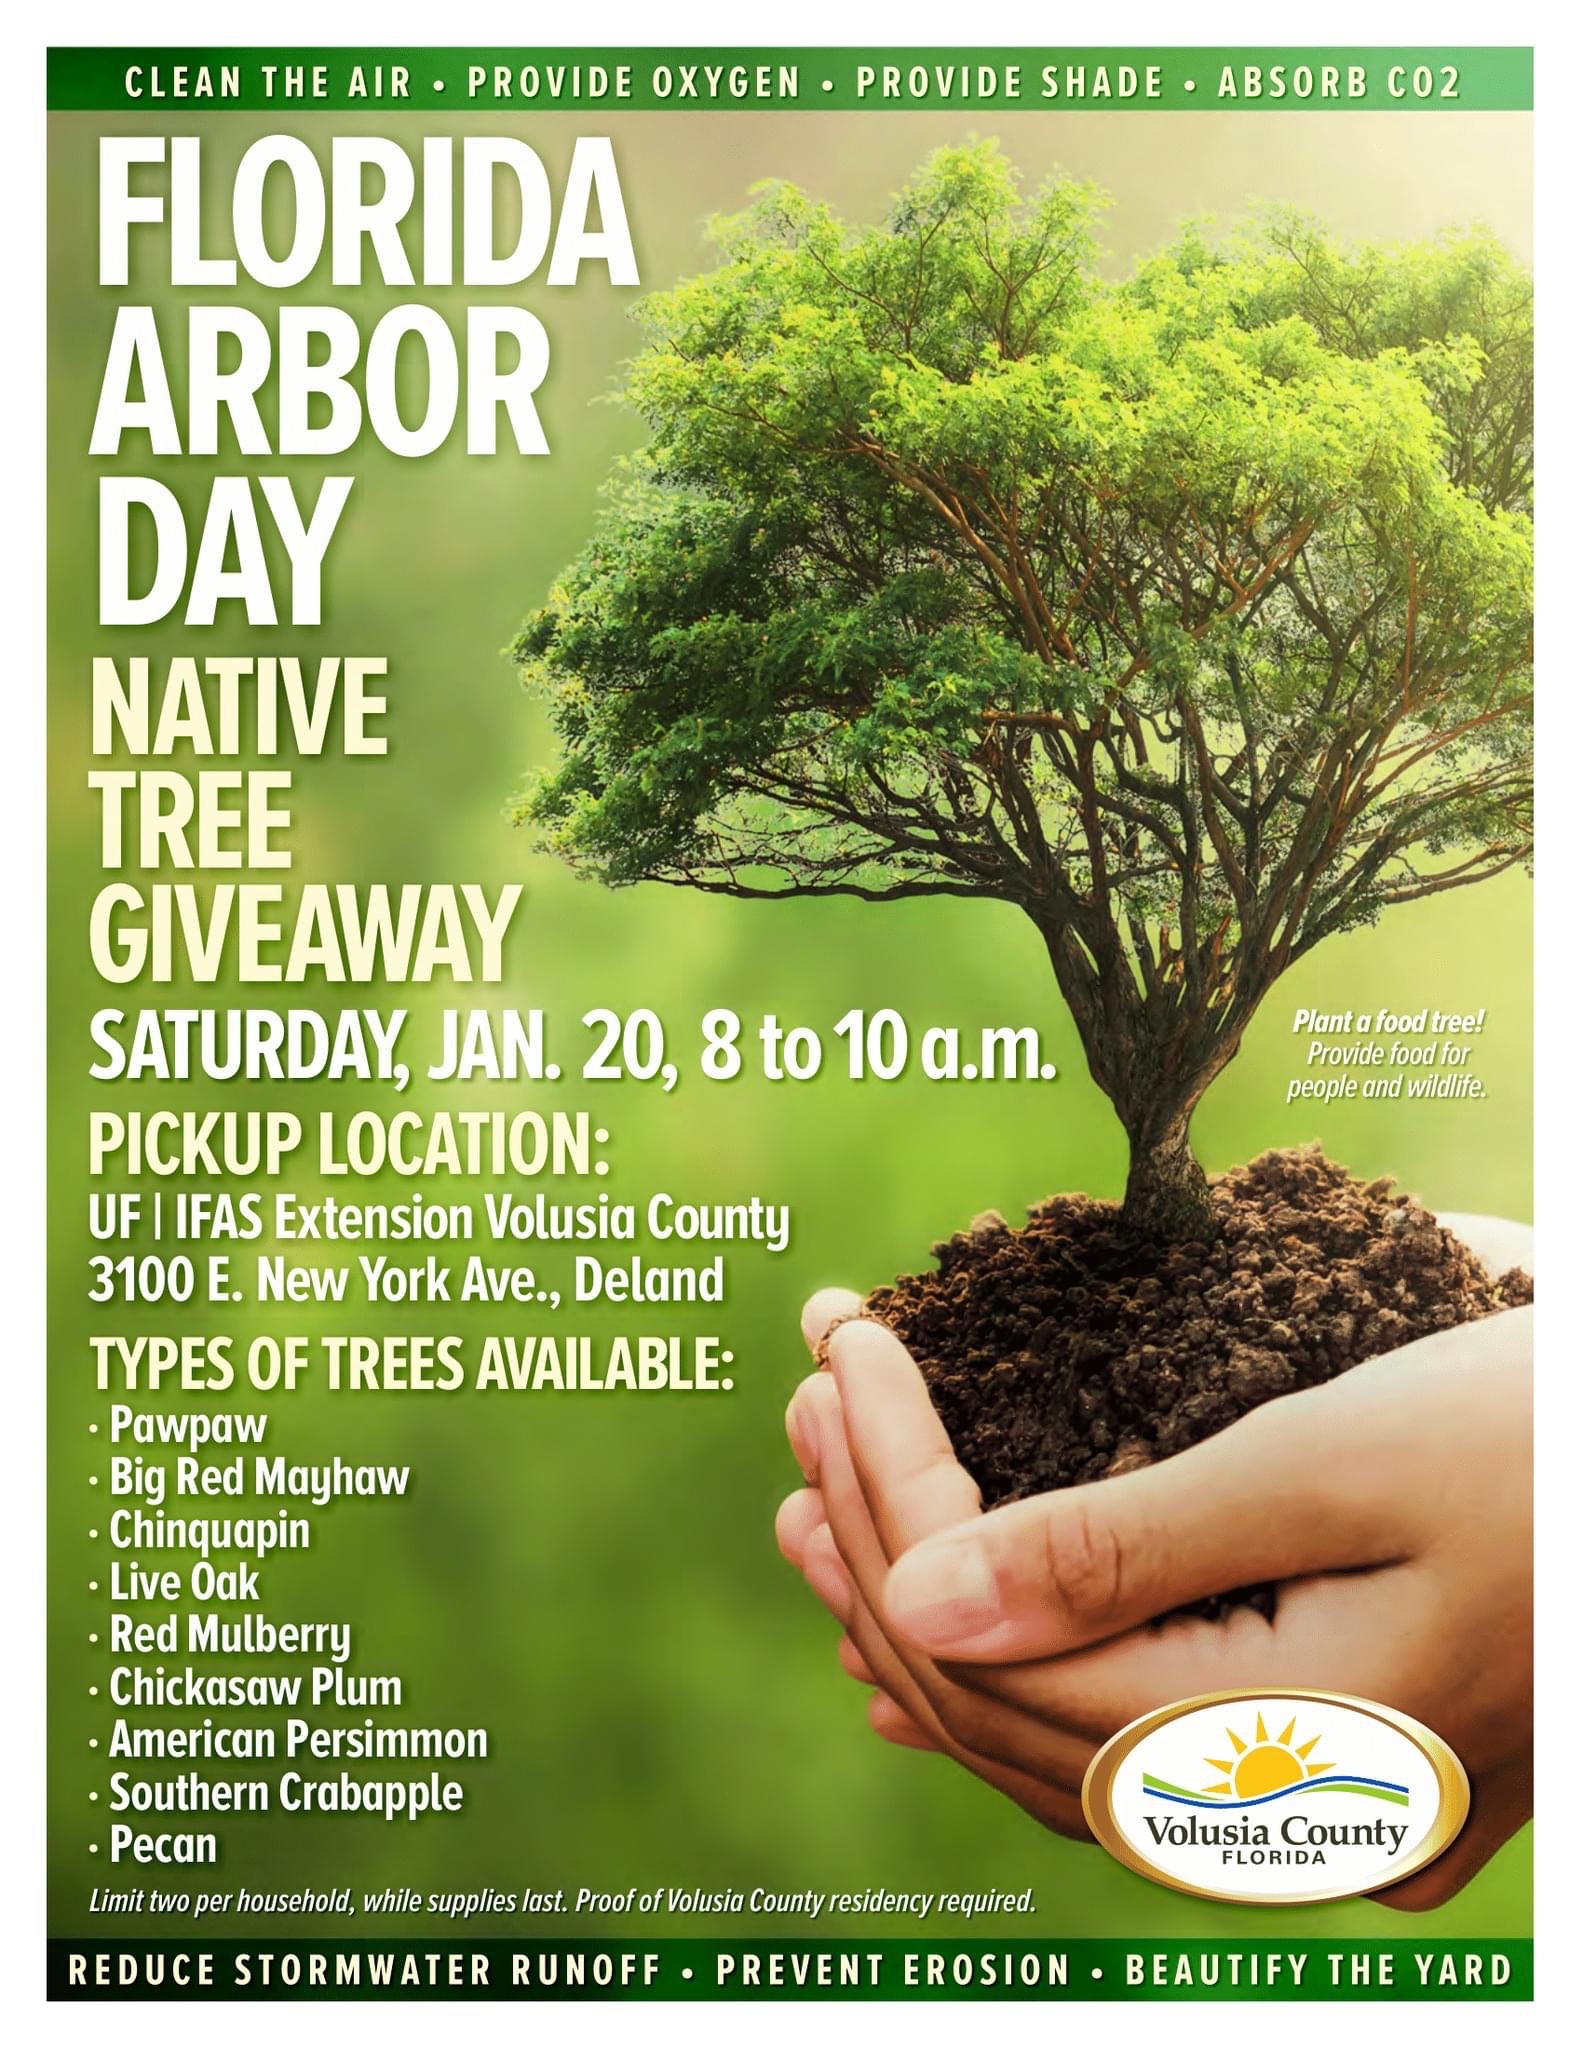 Free Trees to Residents in Celebration of Florida Arbor Day Sanford